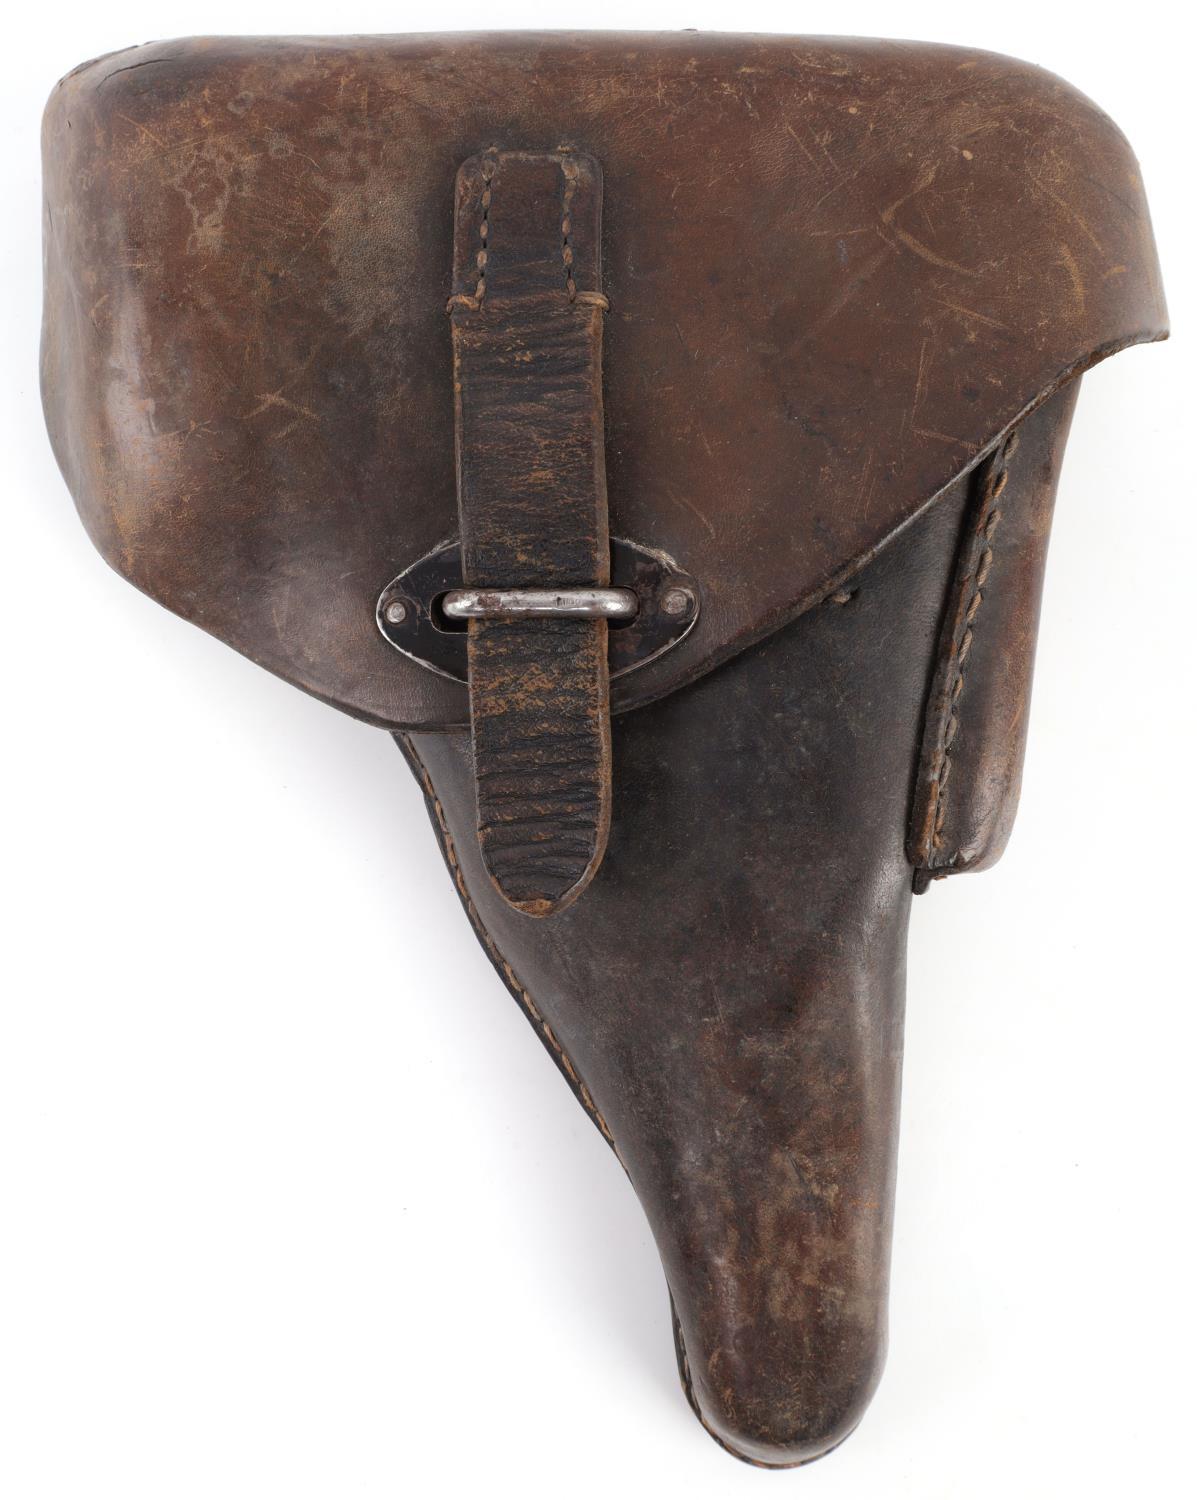 WWII GERMAN REICH P38 LEATHER PISTOL HOLSTER